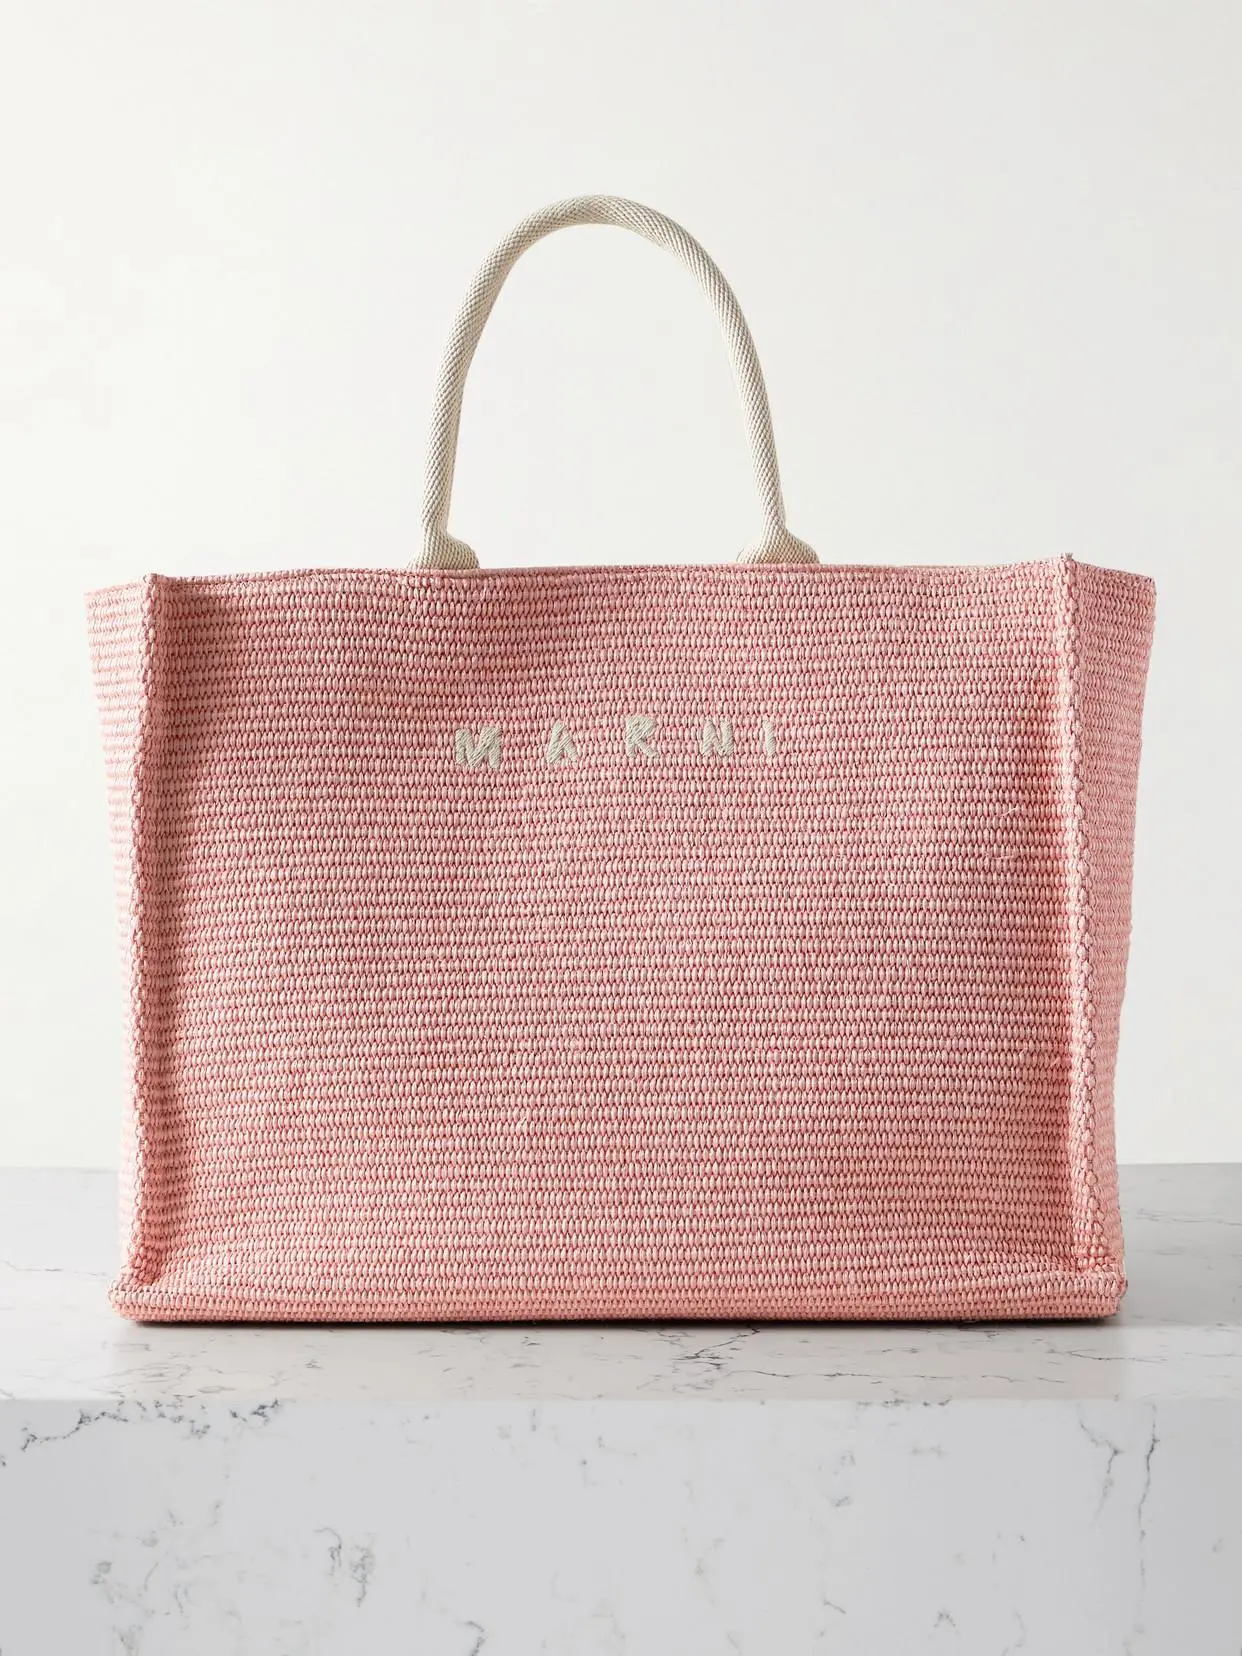 Gianvito Rossi Valì leather tote bag - Pink